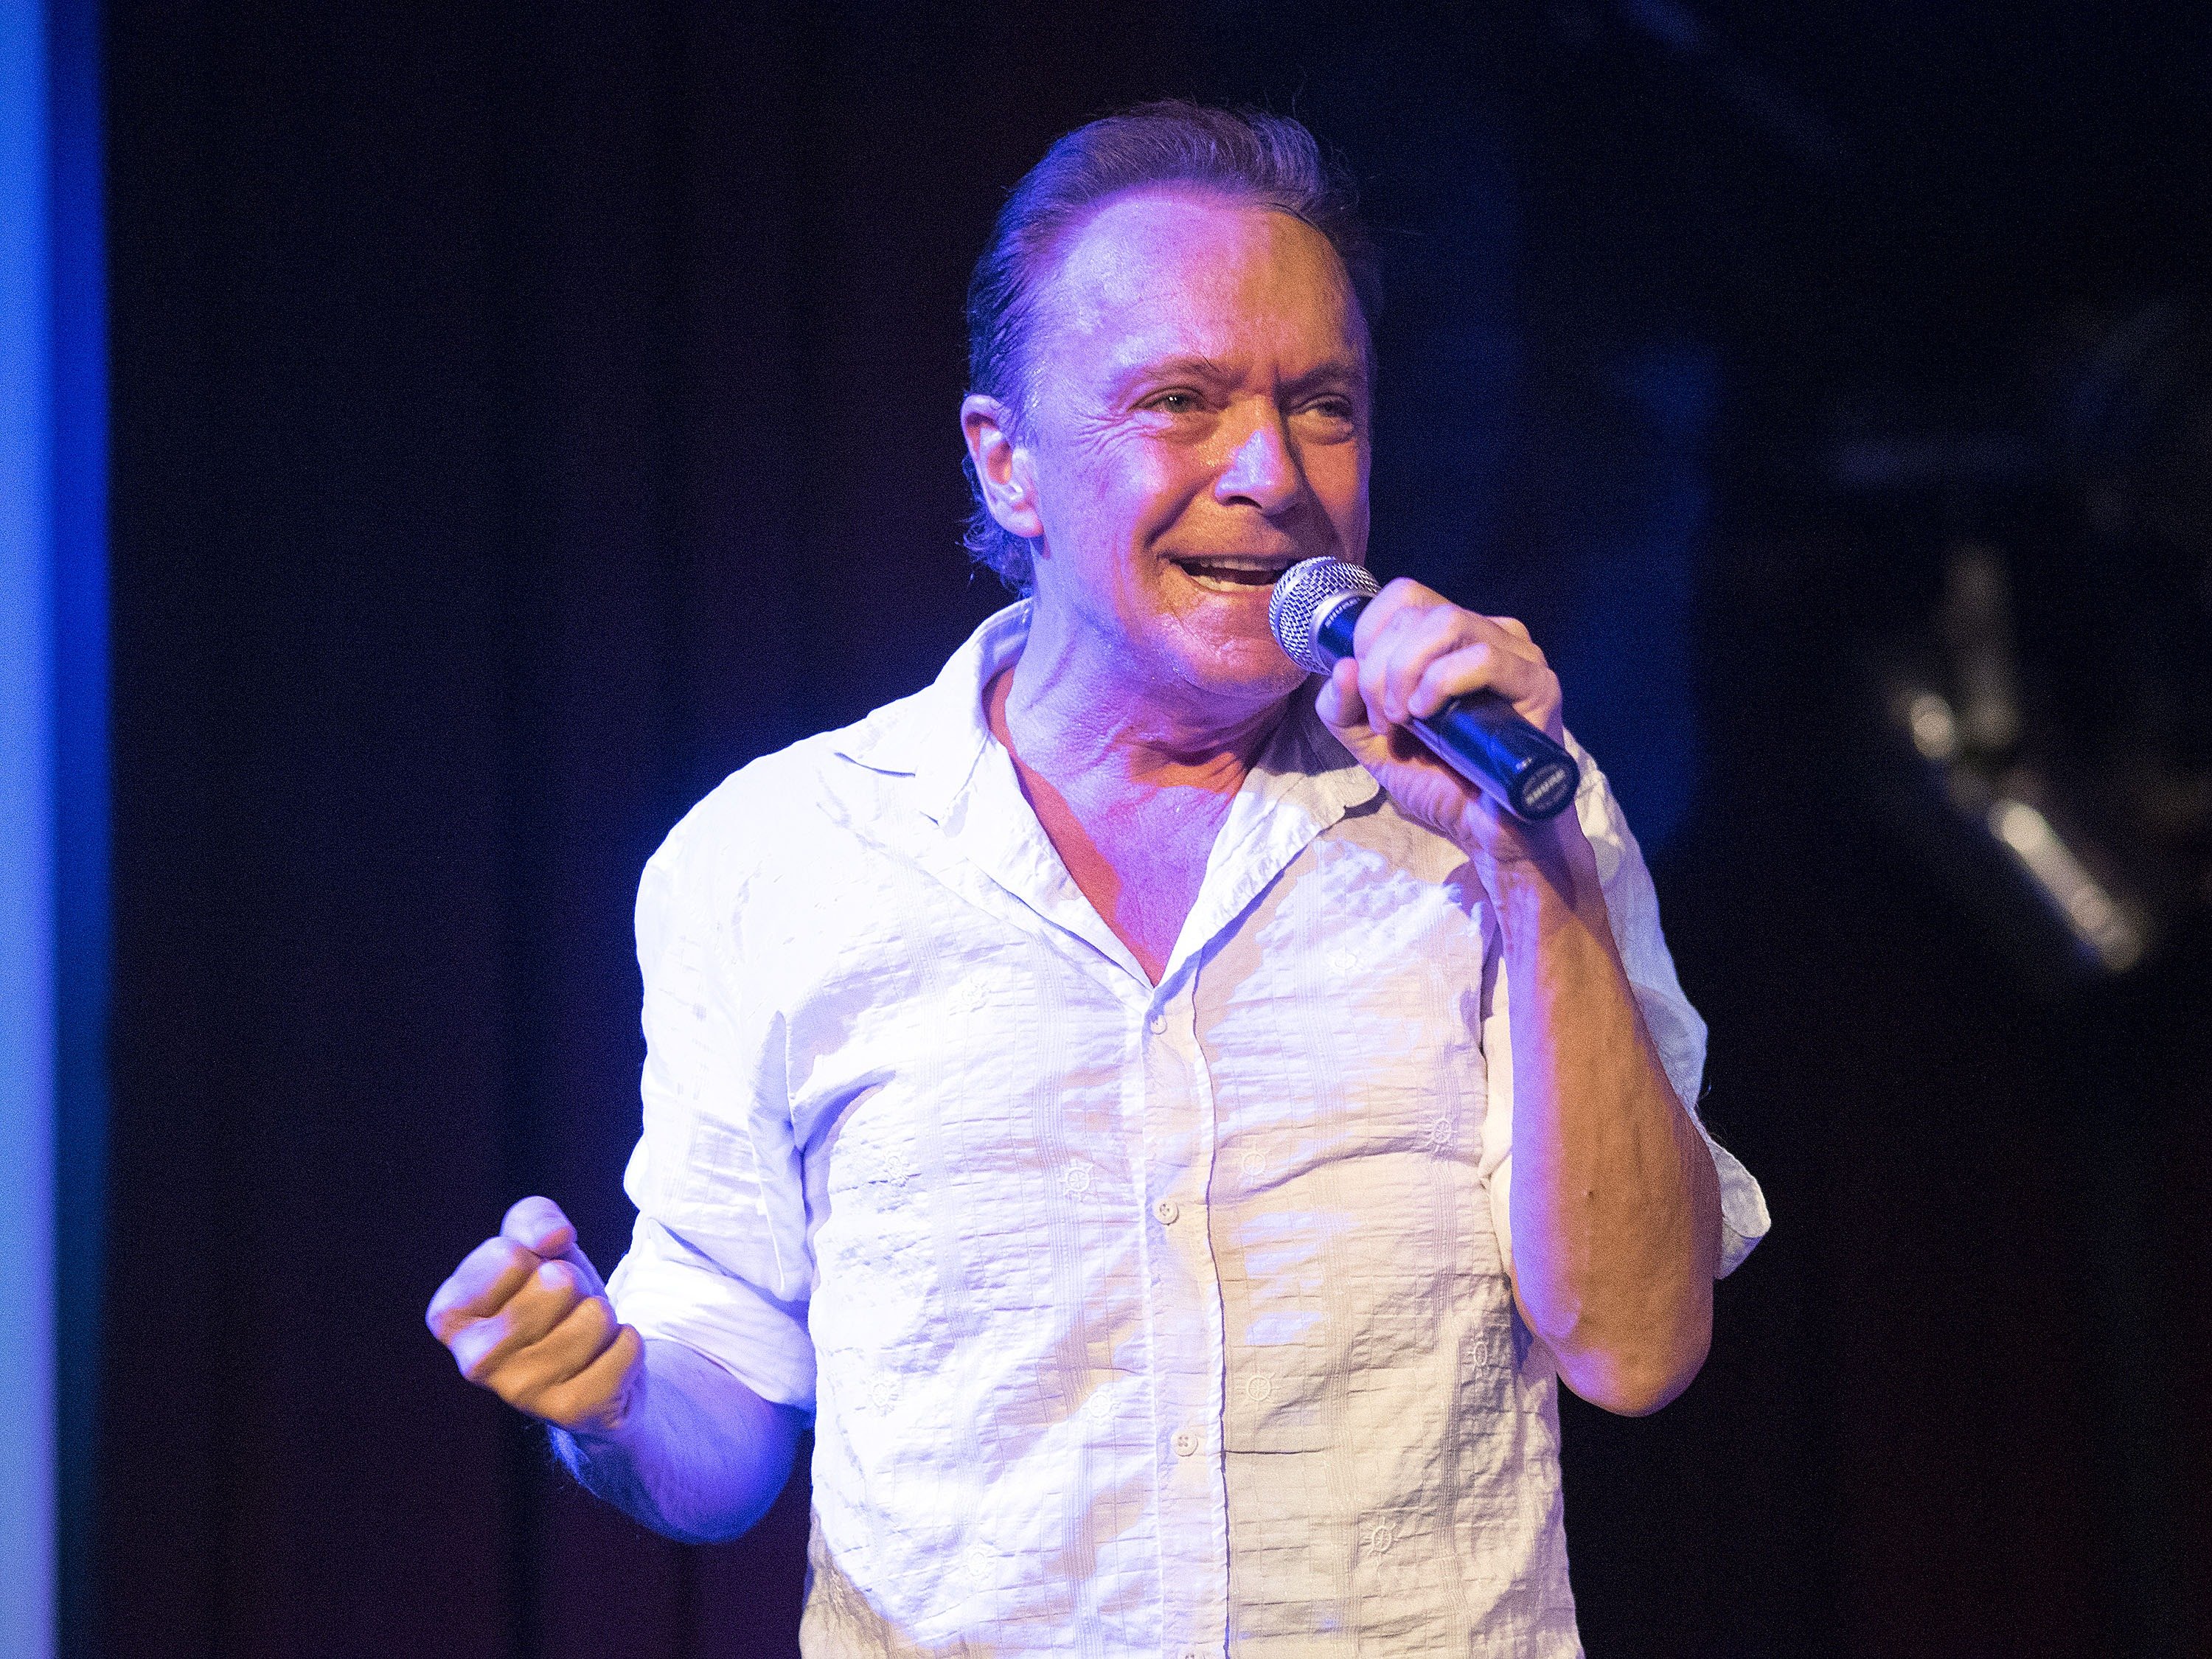 David Cassidy performs at BB King on January 10, 2015 in New York City.  |  |  Photo: Getty Images